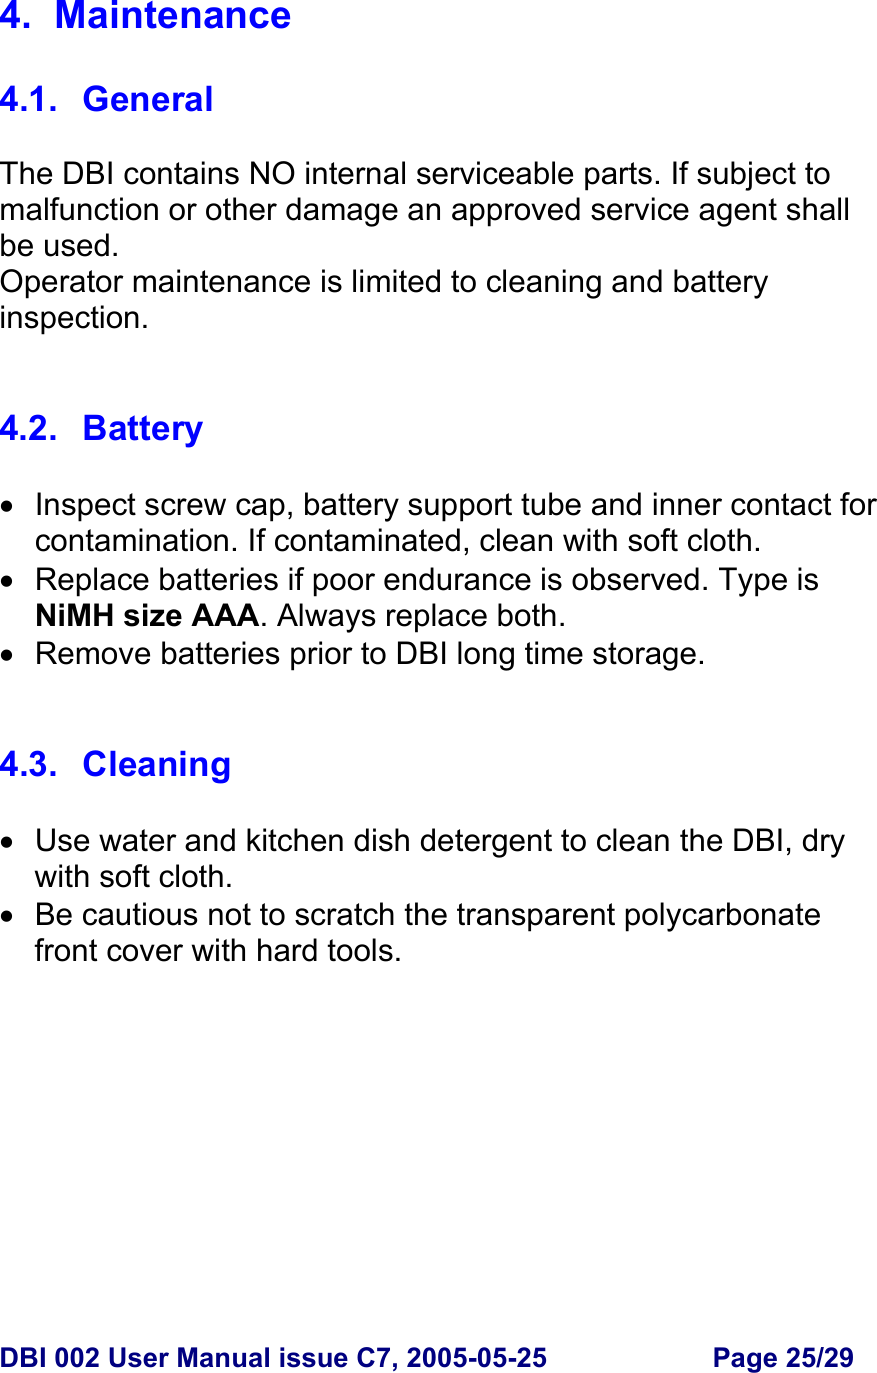  DBI 002 User Manual issue C7, 2005-05-25  Page 25/29  4. Maintenance  4.1. General  The DBI contains NO internal serviceable parts. If subject to malfunction or other damage an approved service agent shall be used. Operator maintenance is limited to cleaning and battery inspection.   4.2. Battery  •  Inspect screw cap, battery support tube and inner contact for contamination. If contaminated, clean with soft cloth. •  Replace batteries if poor endurance is observed. Type is NiMH size AAA. Always replace both. •  Remove batteries prior to DBI long time storage.   4.3. Cleaning  •  Use water and kitchen dish detergent to clean the DBI, dry with soft cloth. •  Be cautious not to scratch the transparent polycarbonate front cover with hard tools.    